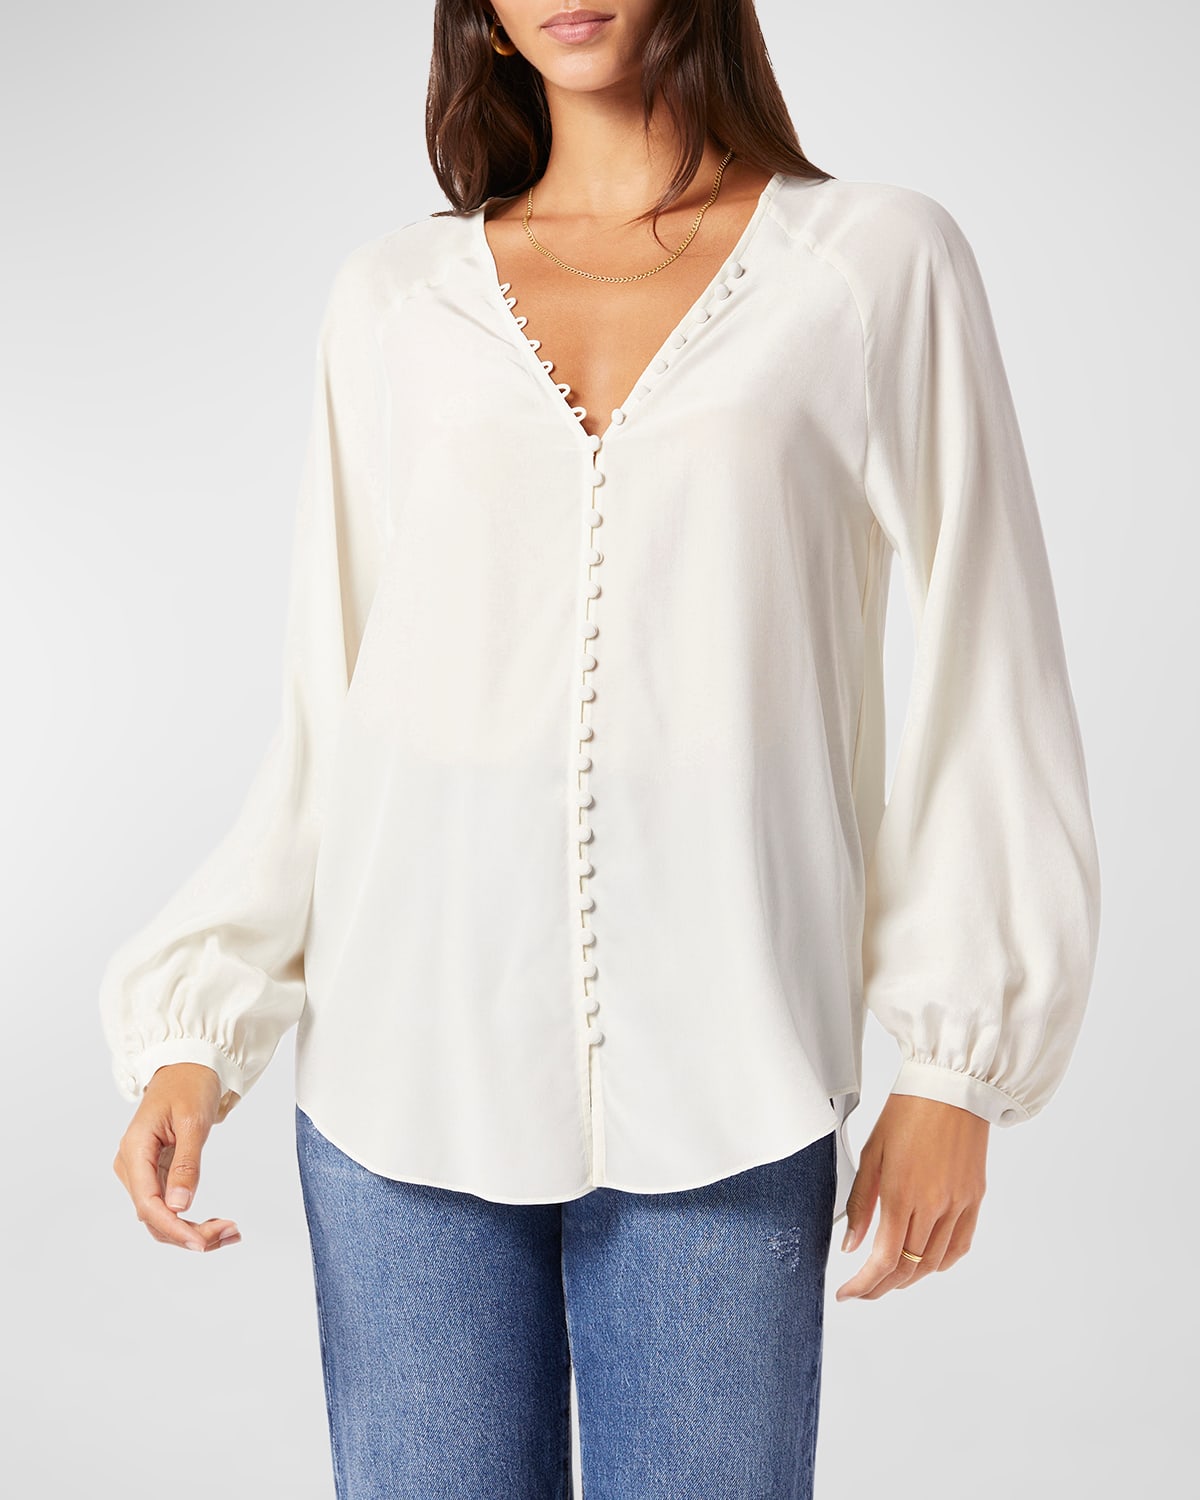 JOIE SHARIANA SILK BUTTON-FRONT BLOUSE